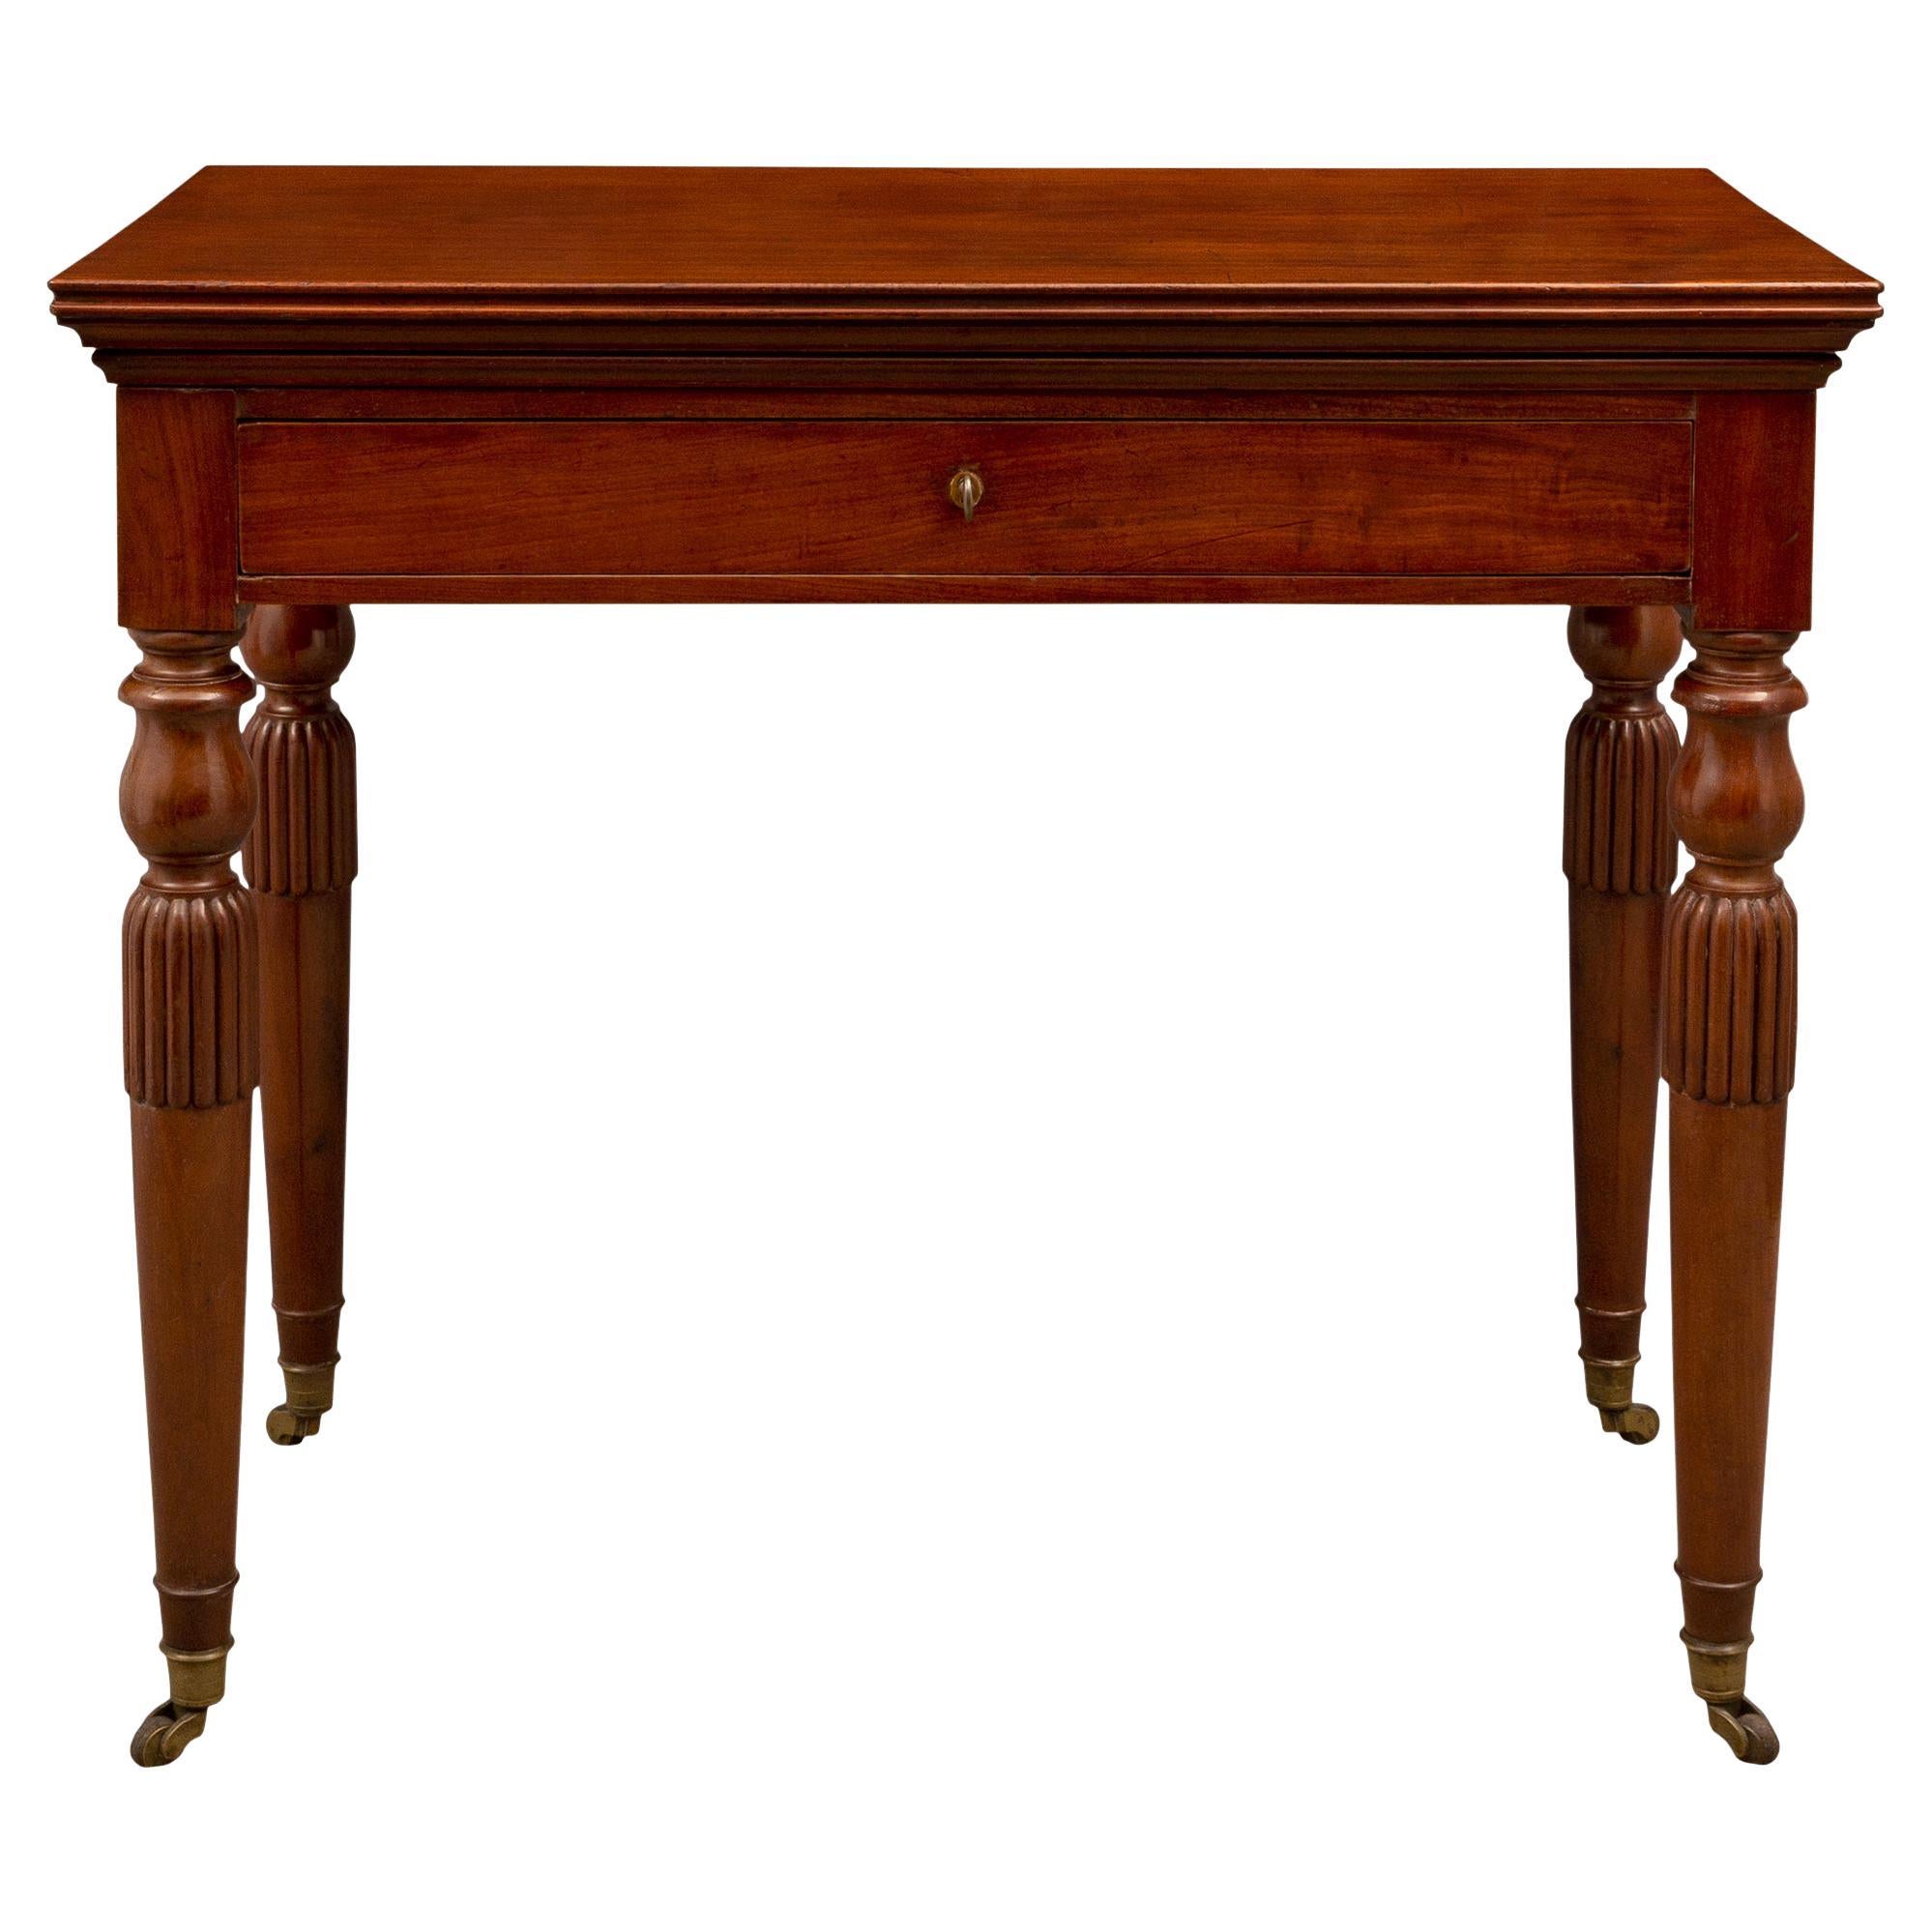 French Early 19th Century Louis Philippe Period Mahogany Side Table/Desk